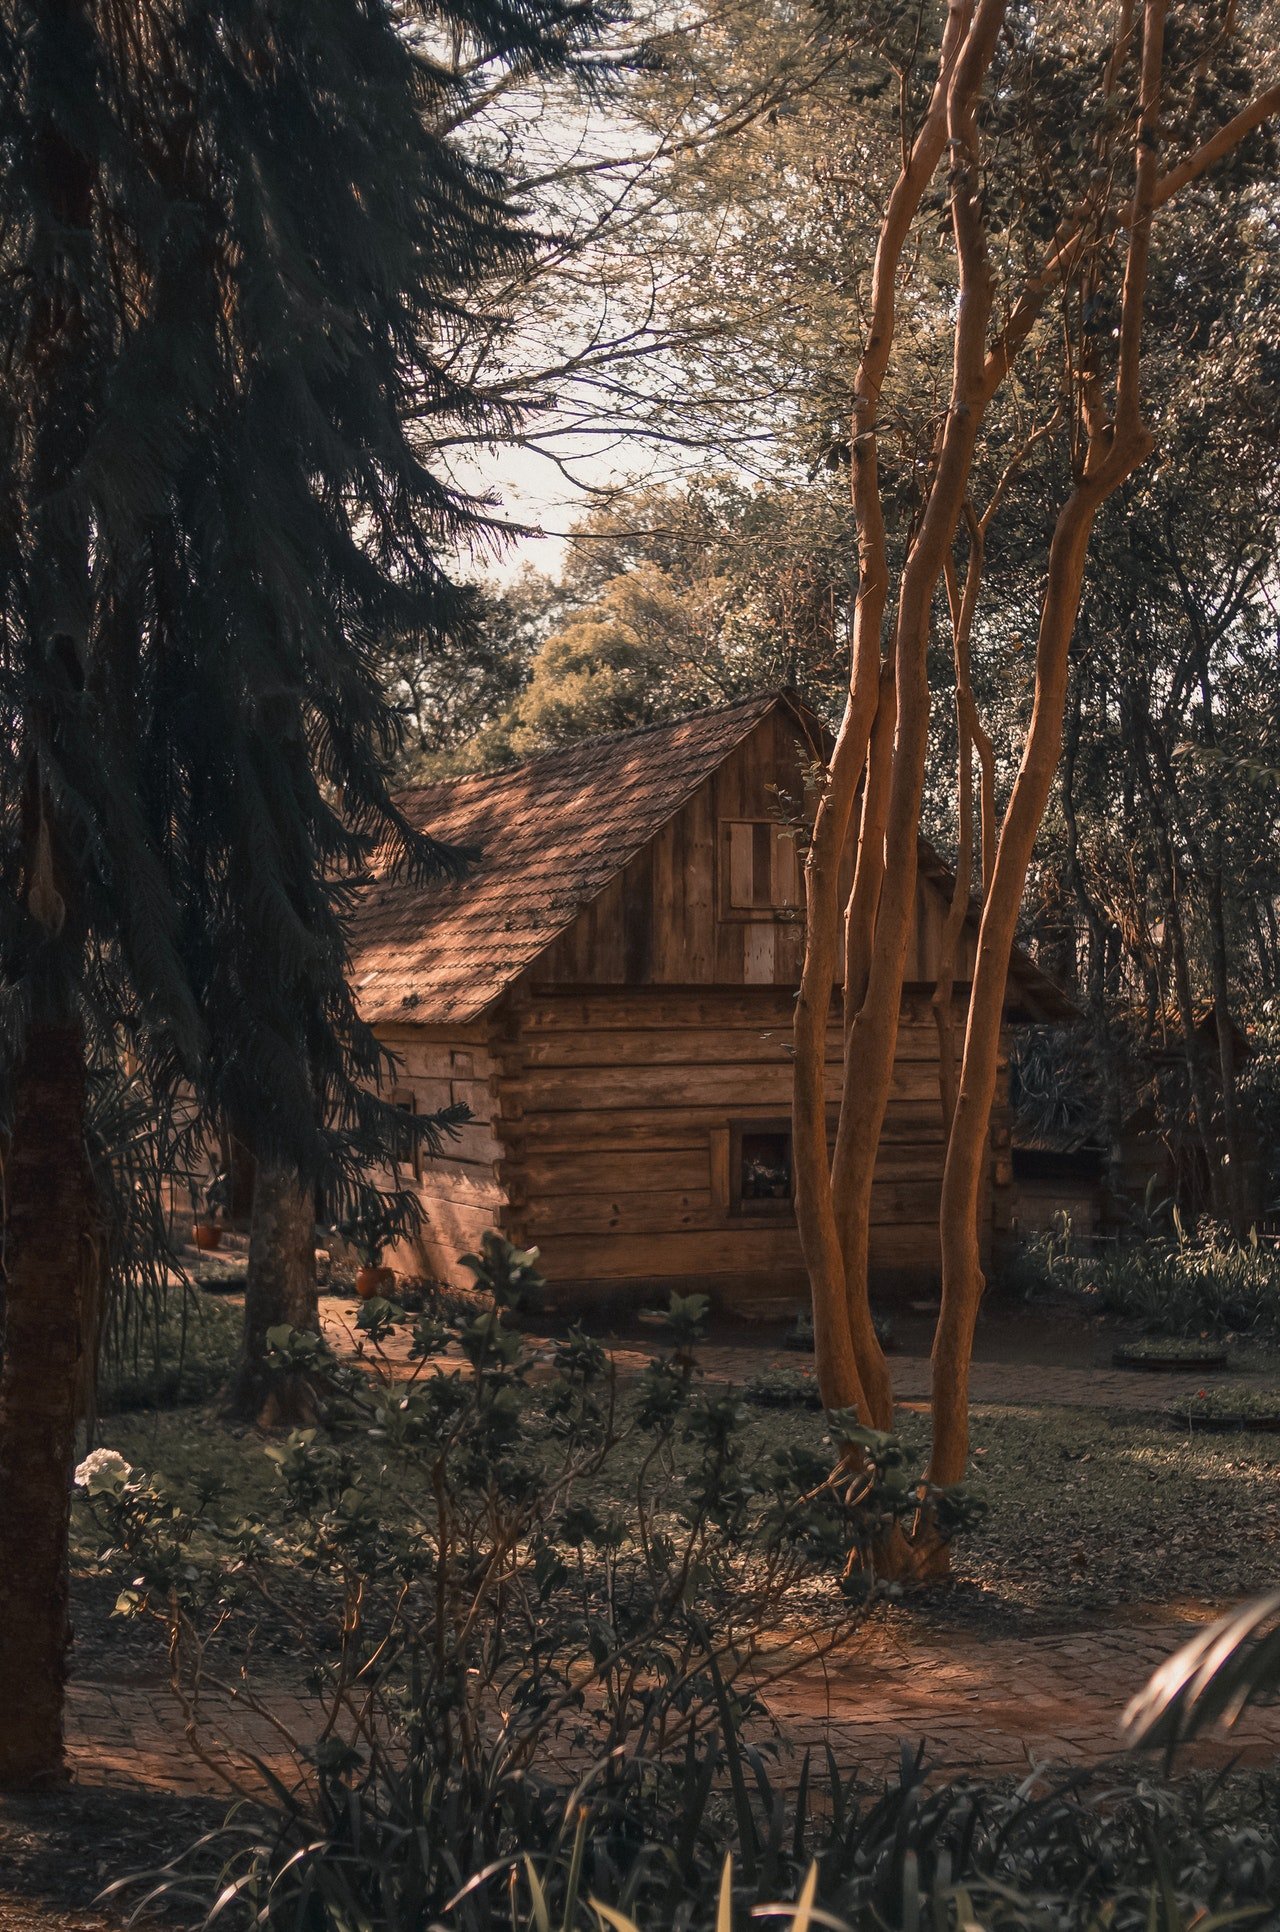 Photo of a cabin in the woods | Photo: Pexels